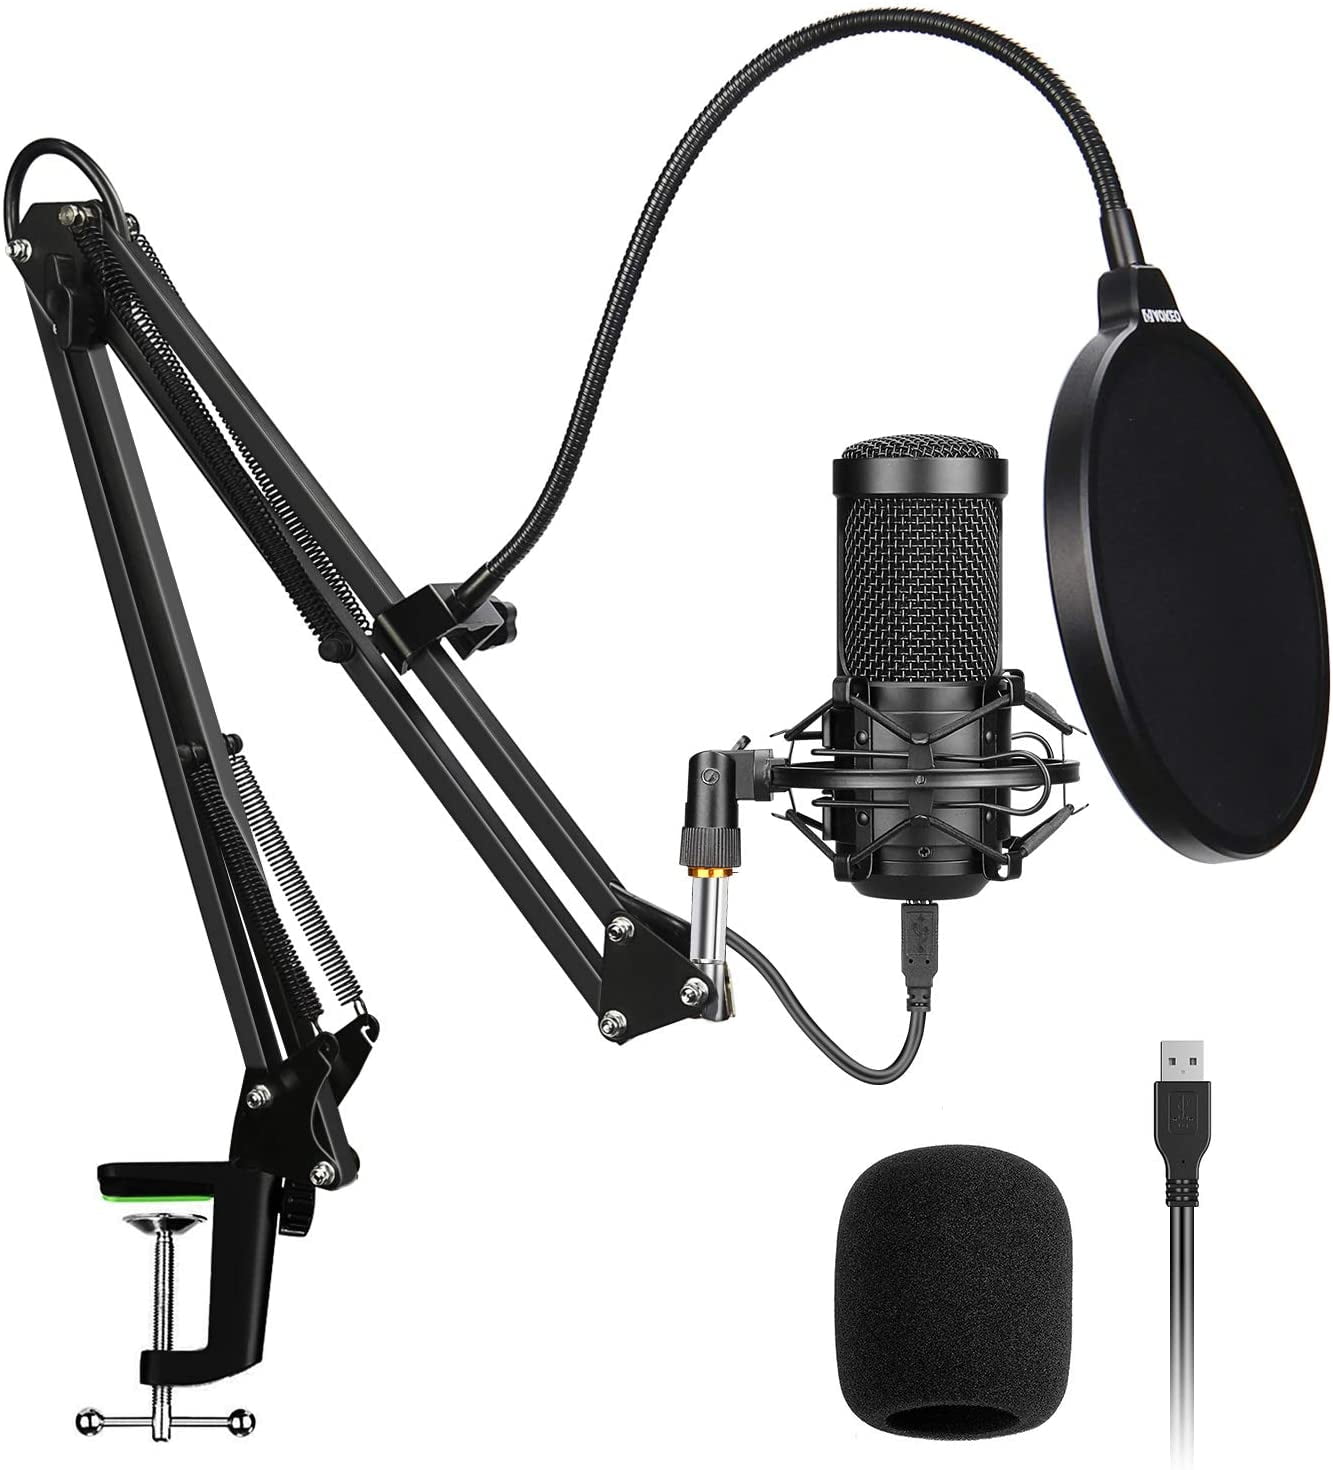 Cardioid Computer Condenser Microphone Studio Practical USB Microphone Podcasting Streaming Recording for Gaming Come with Shock Mount